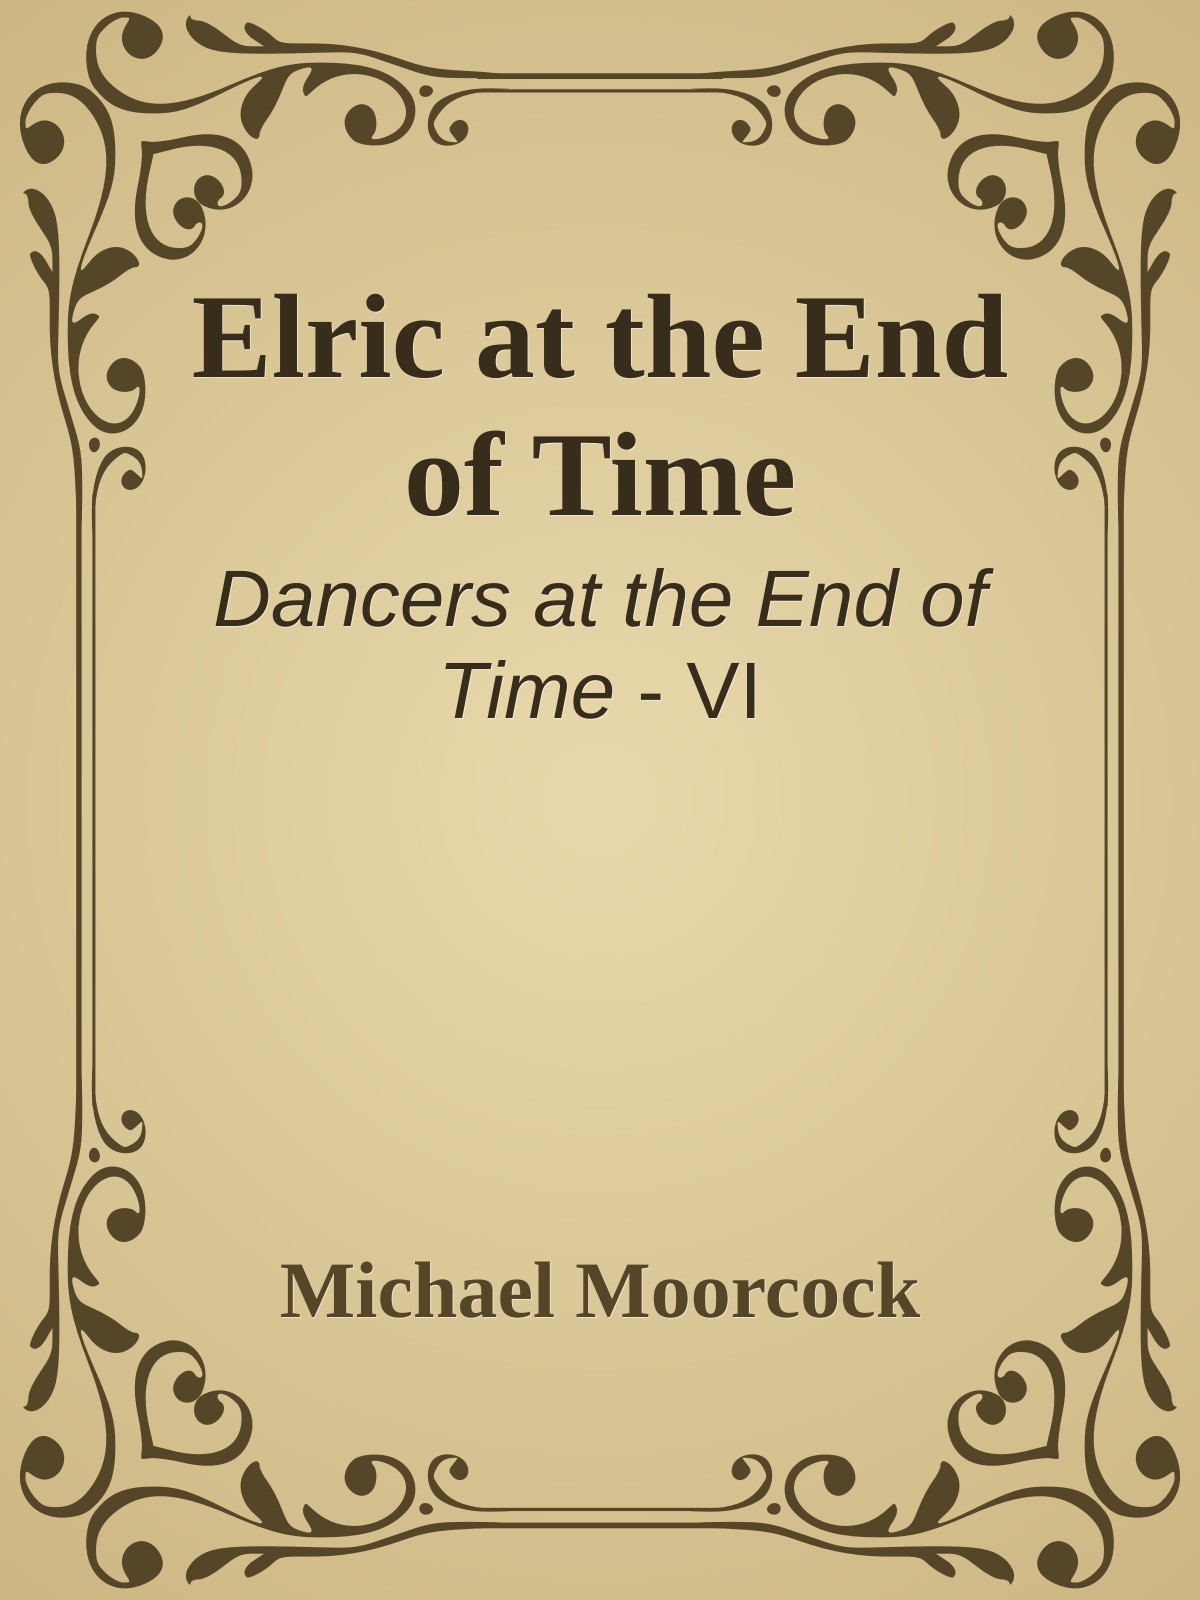 Elric at the End of Time